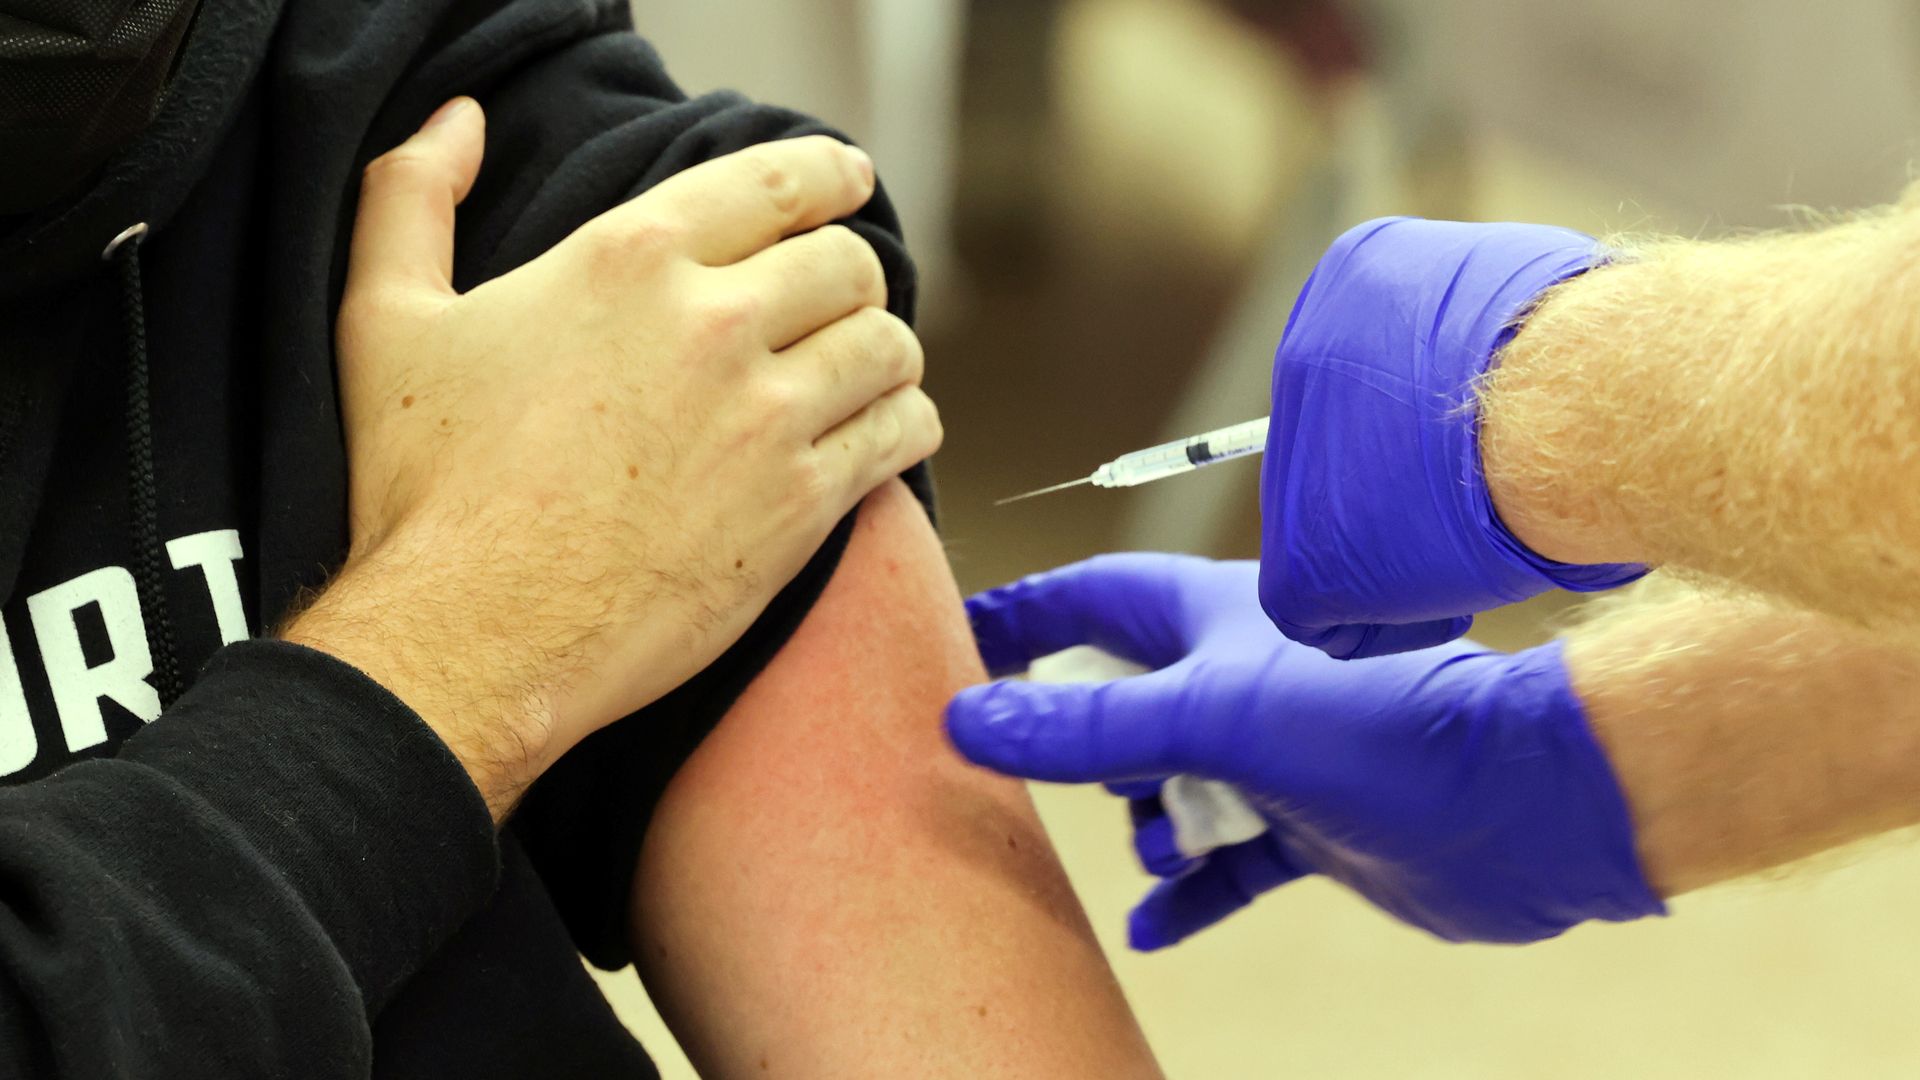 Photo of gloved hands reaching for an arm as a vaccine shot is about to be delivered